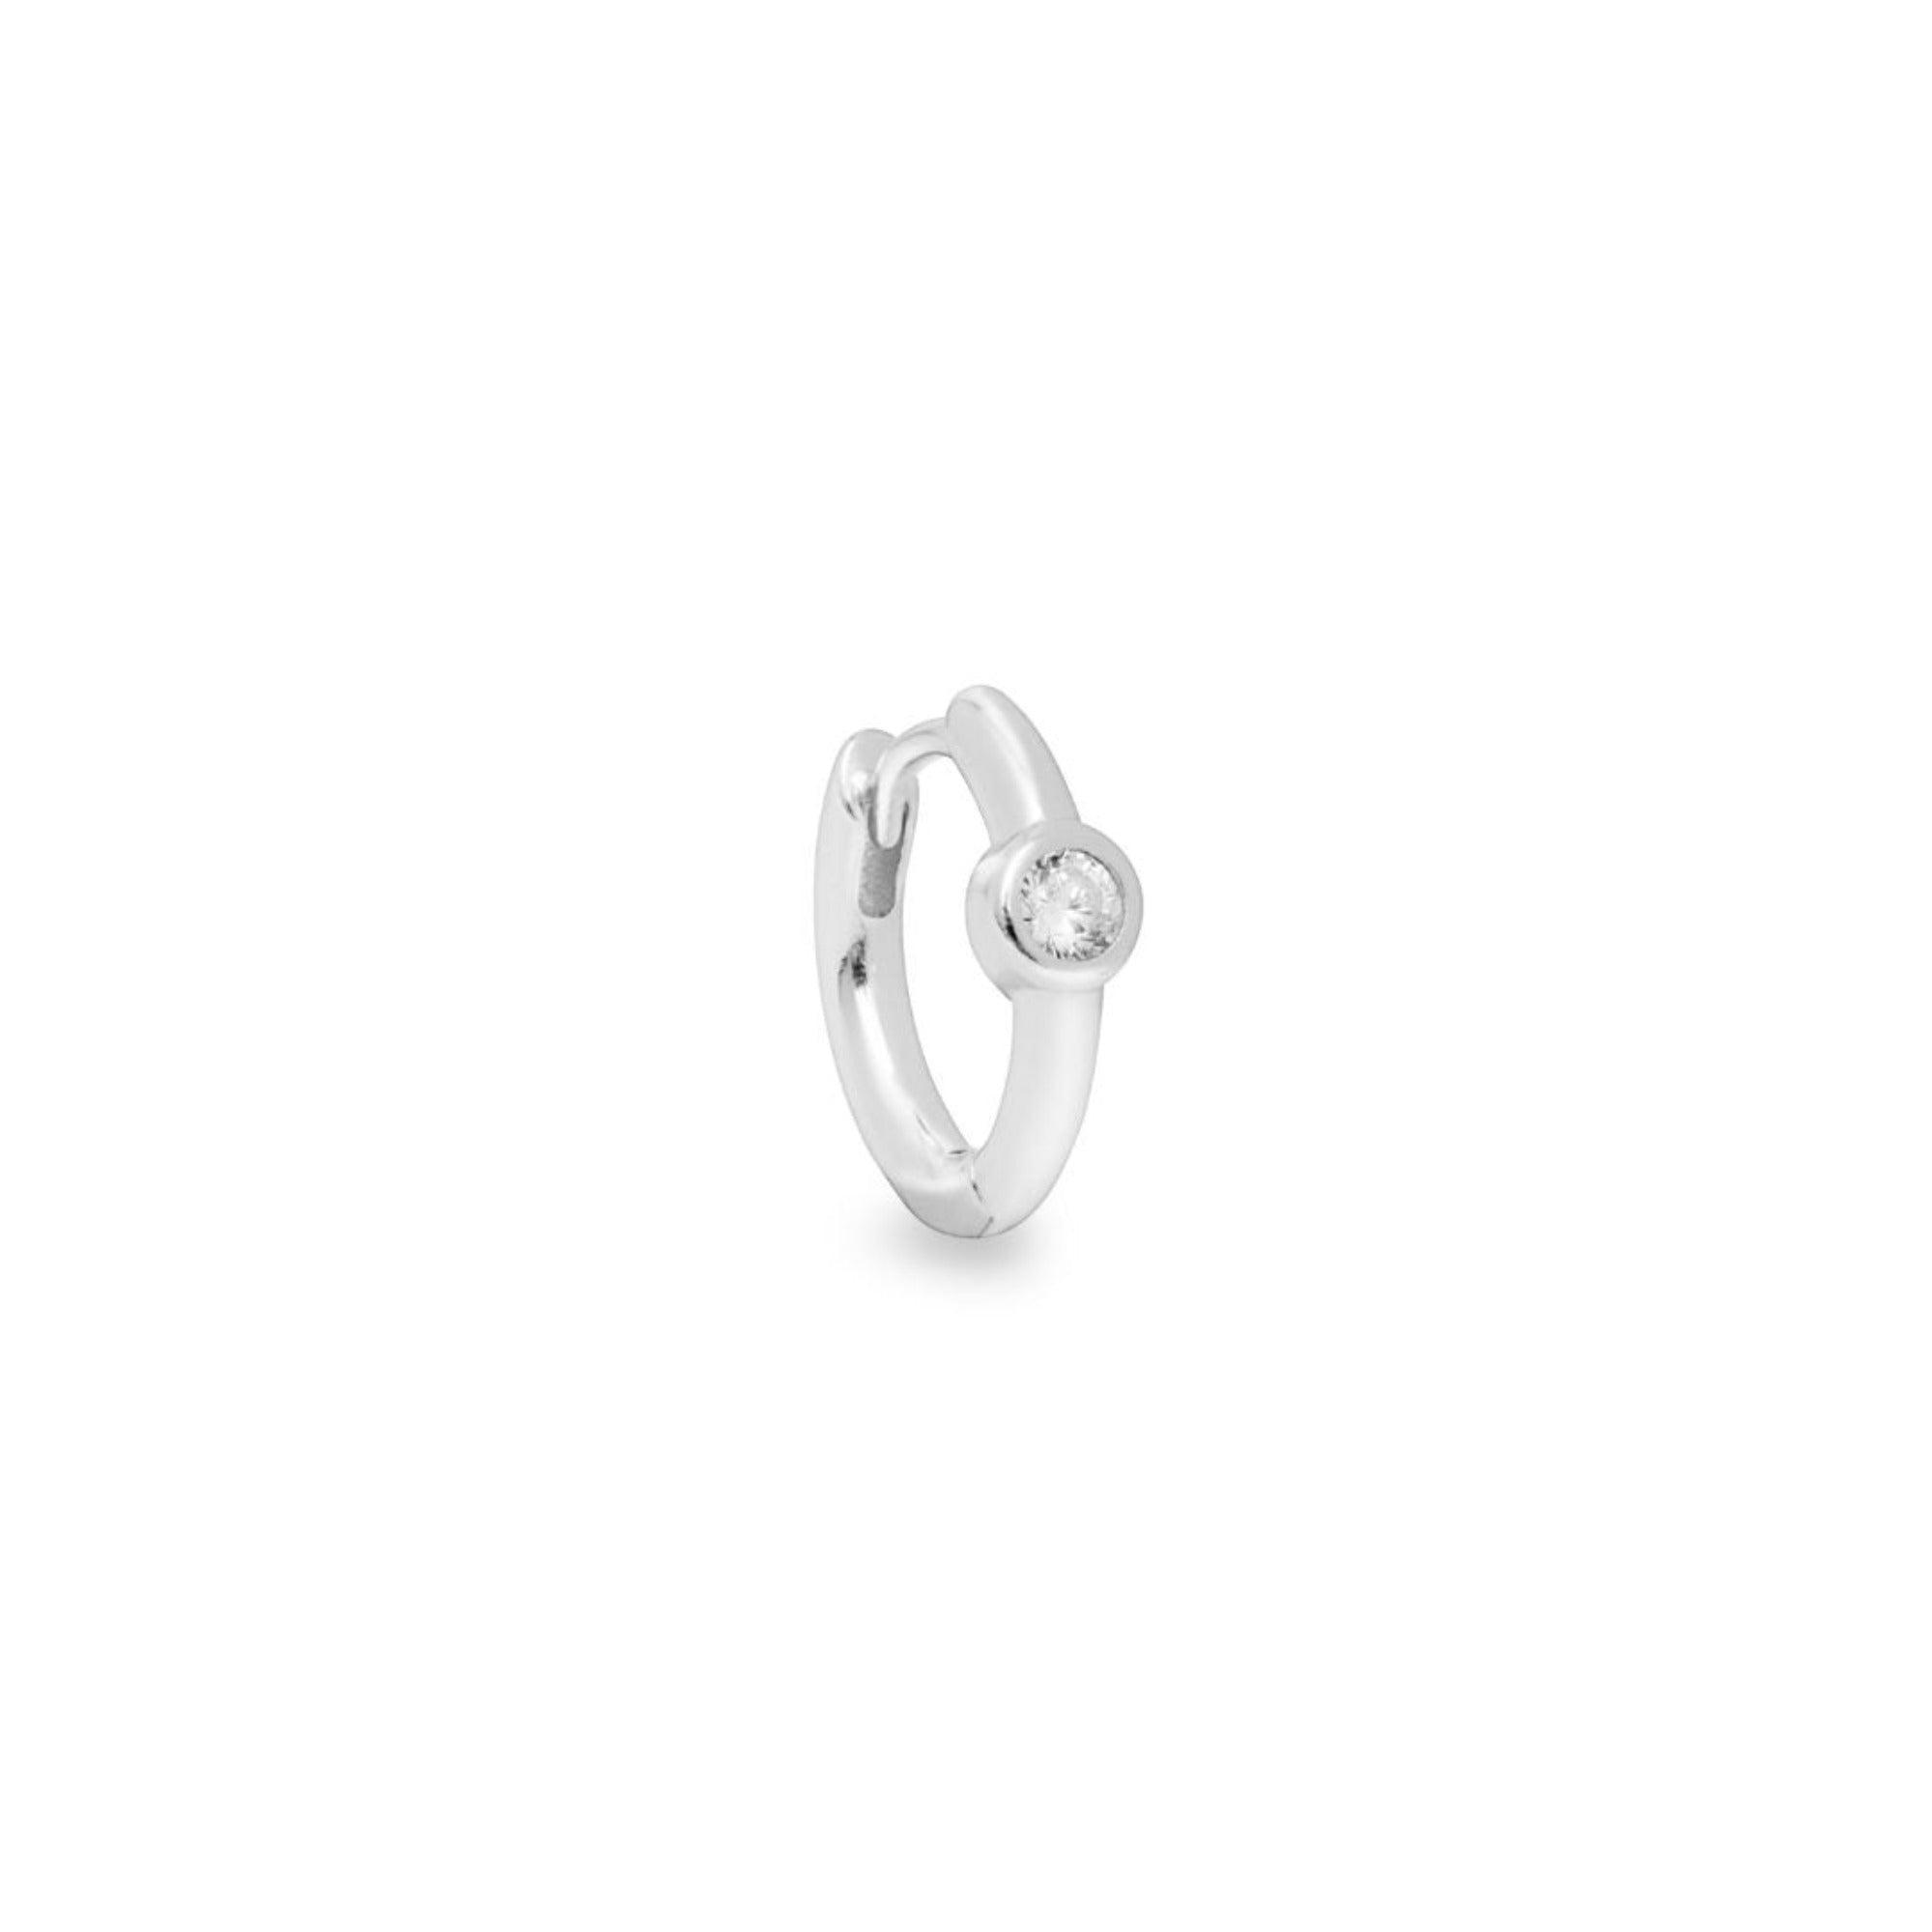 Biseau white gold single huggie with solitaire stone - Helix & Conch